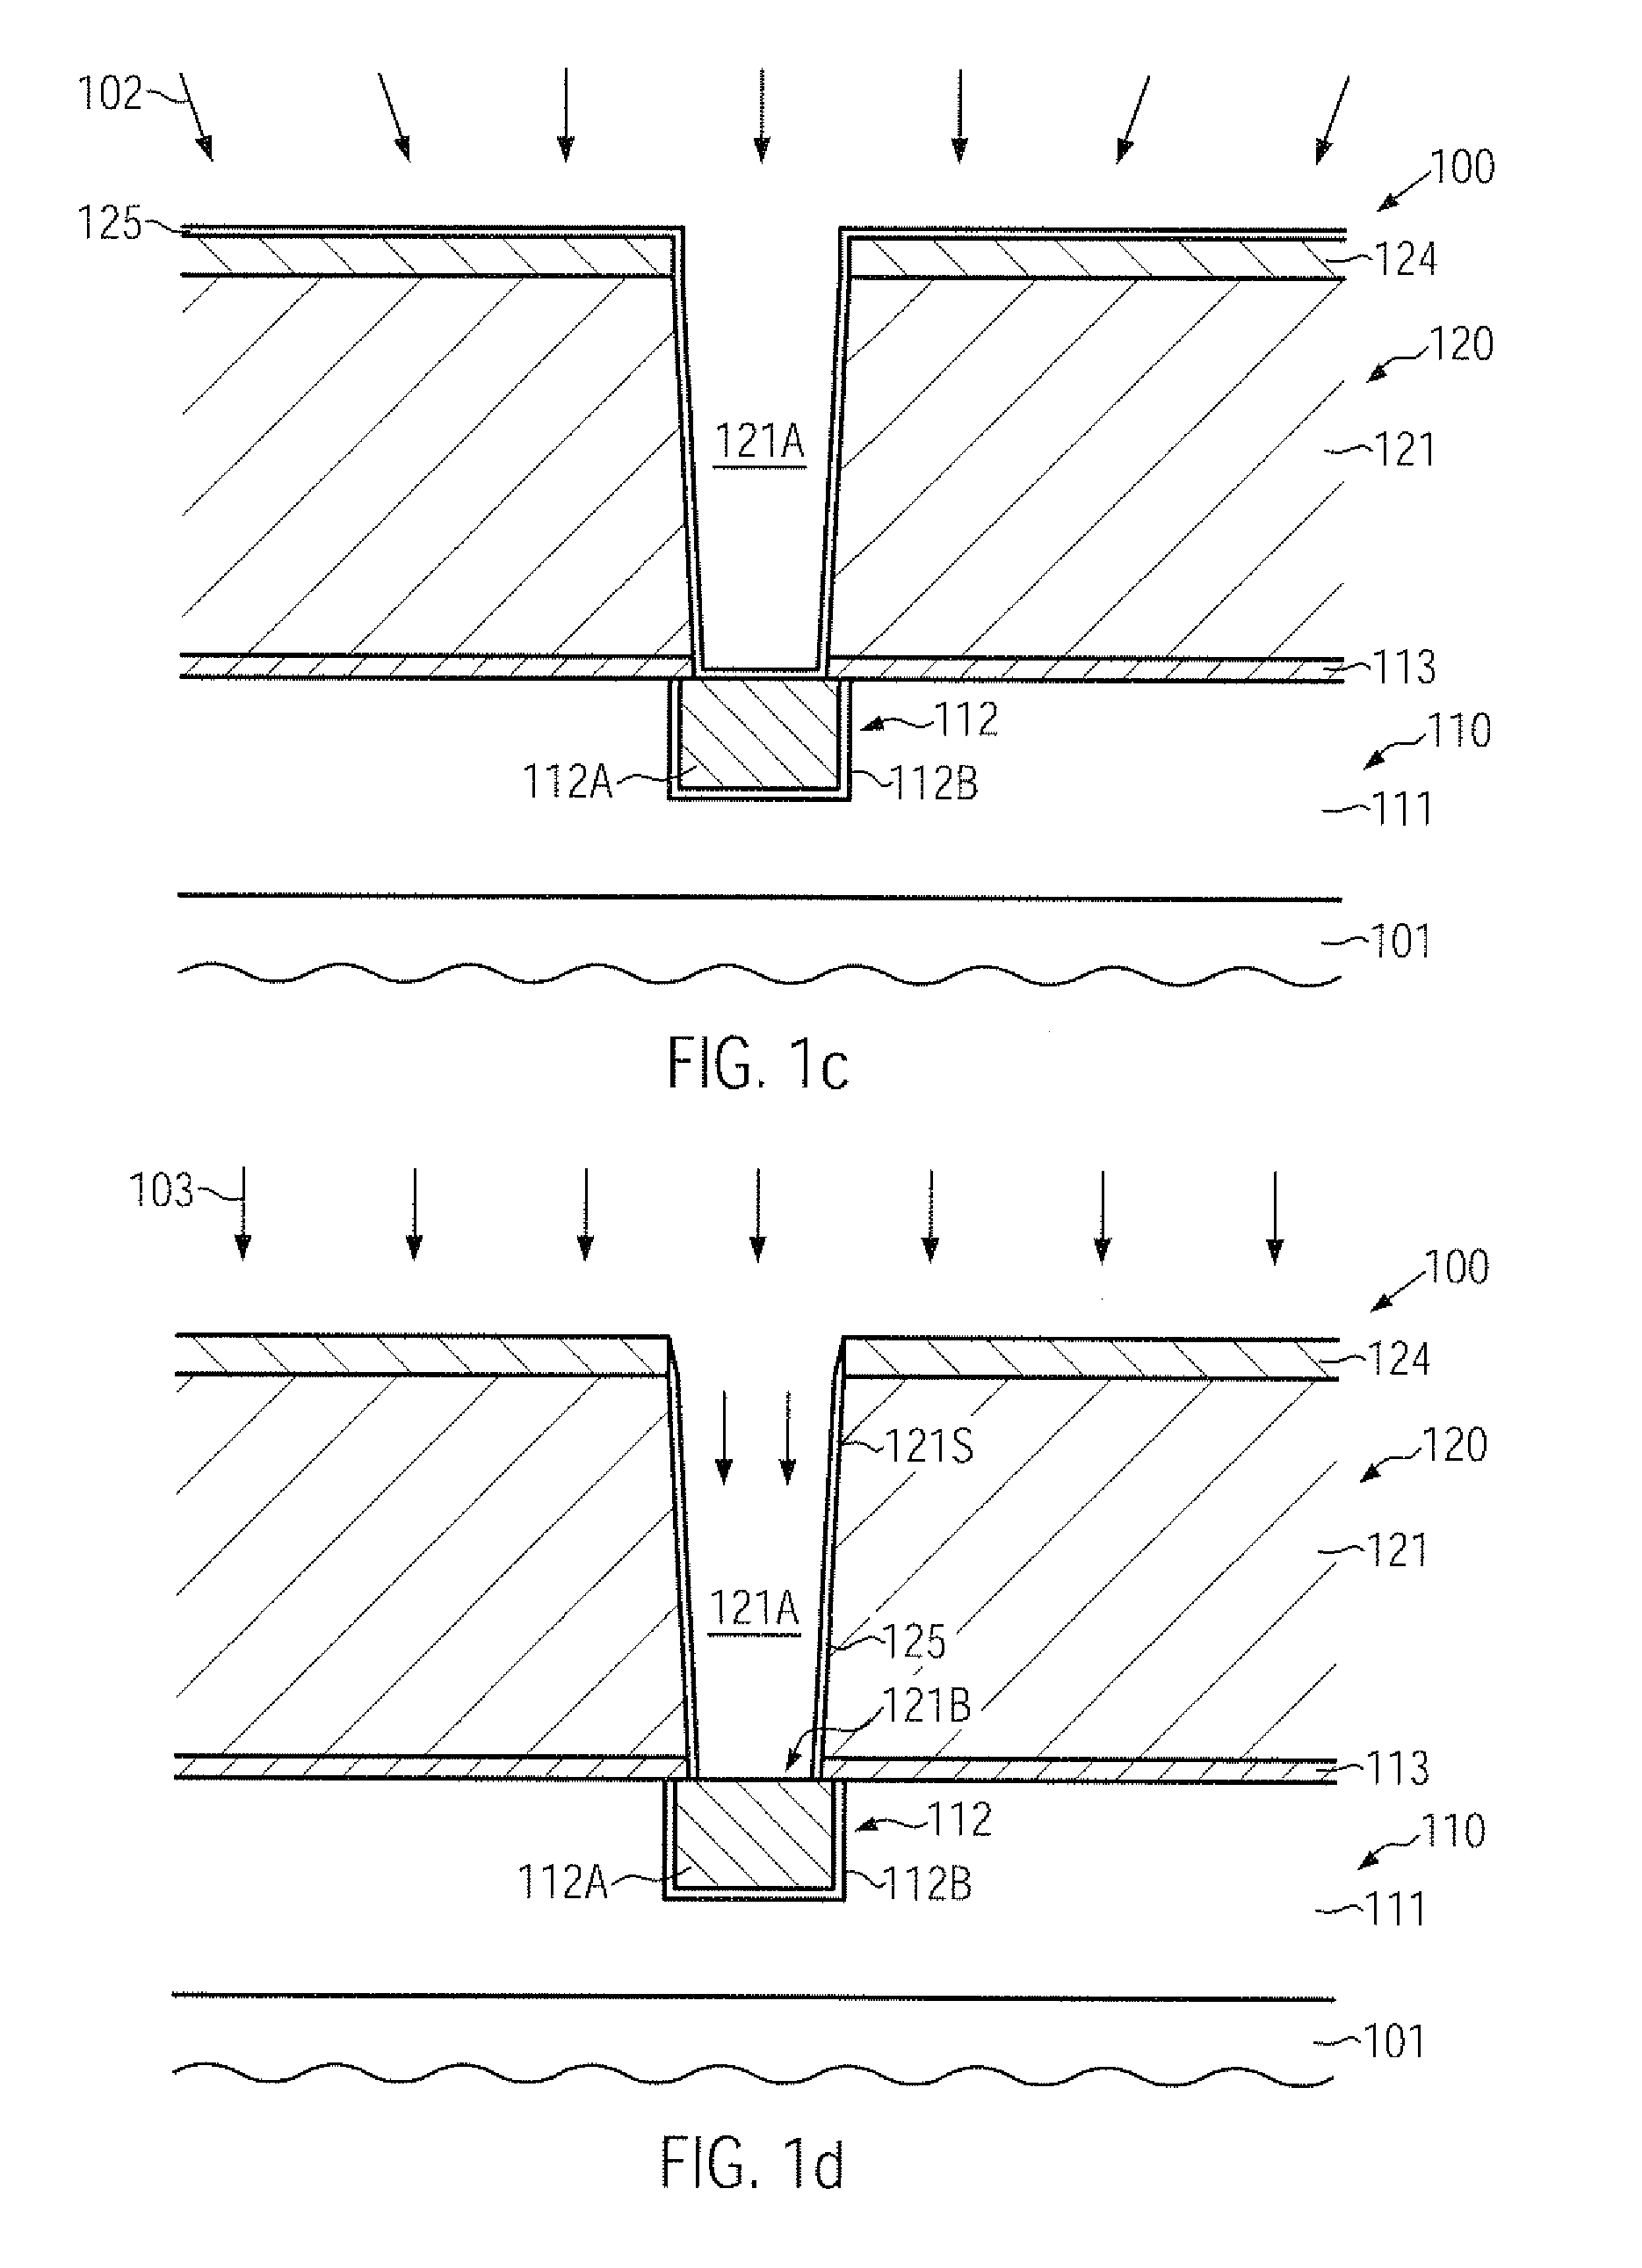 Reducing metal voids in a metallization layer stack of a semiconductor device by providing a dielectric barrier layer